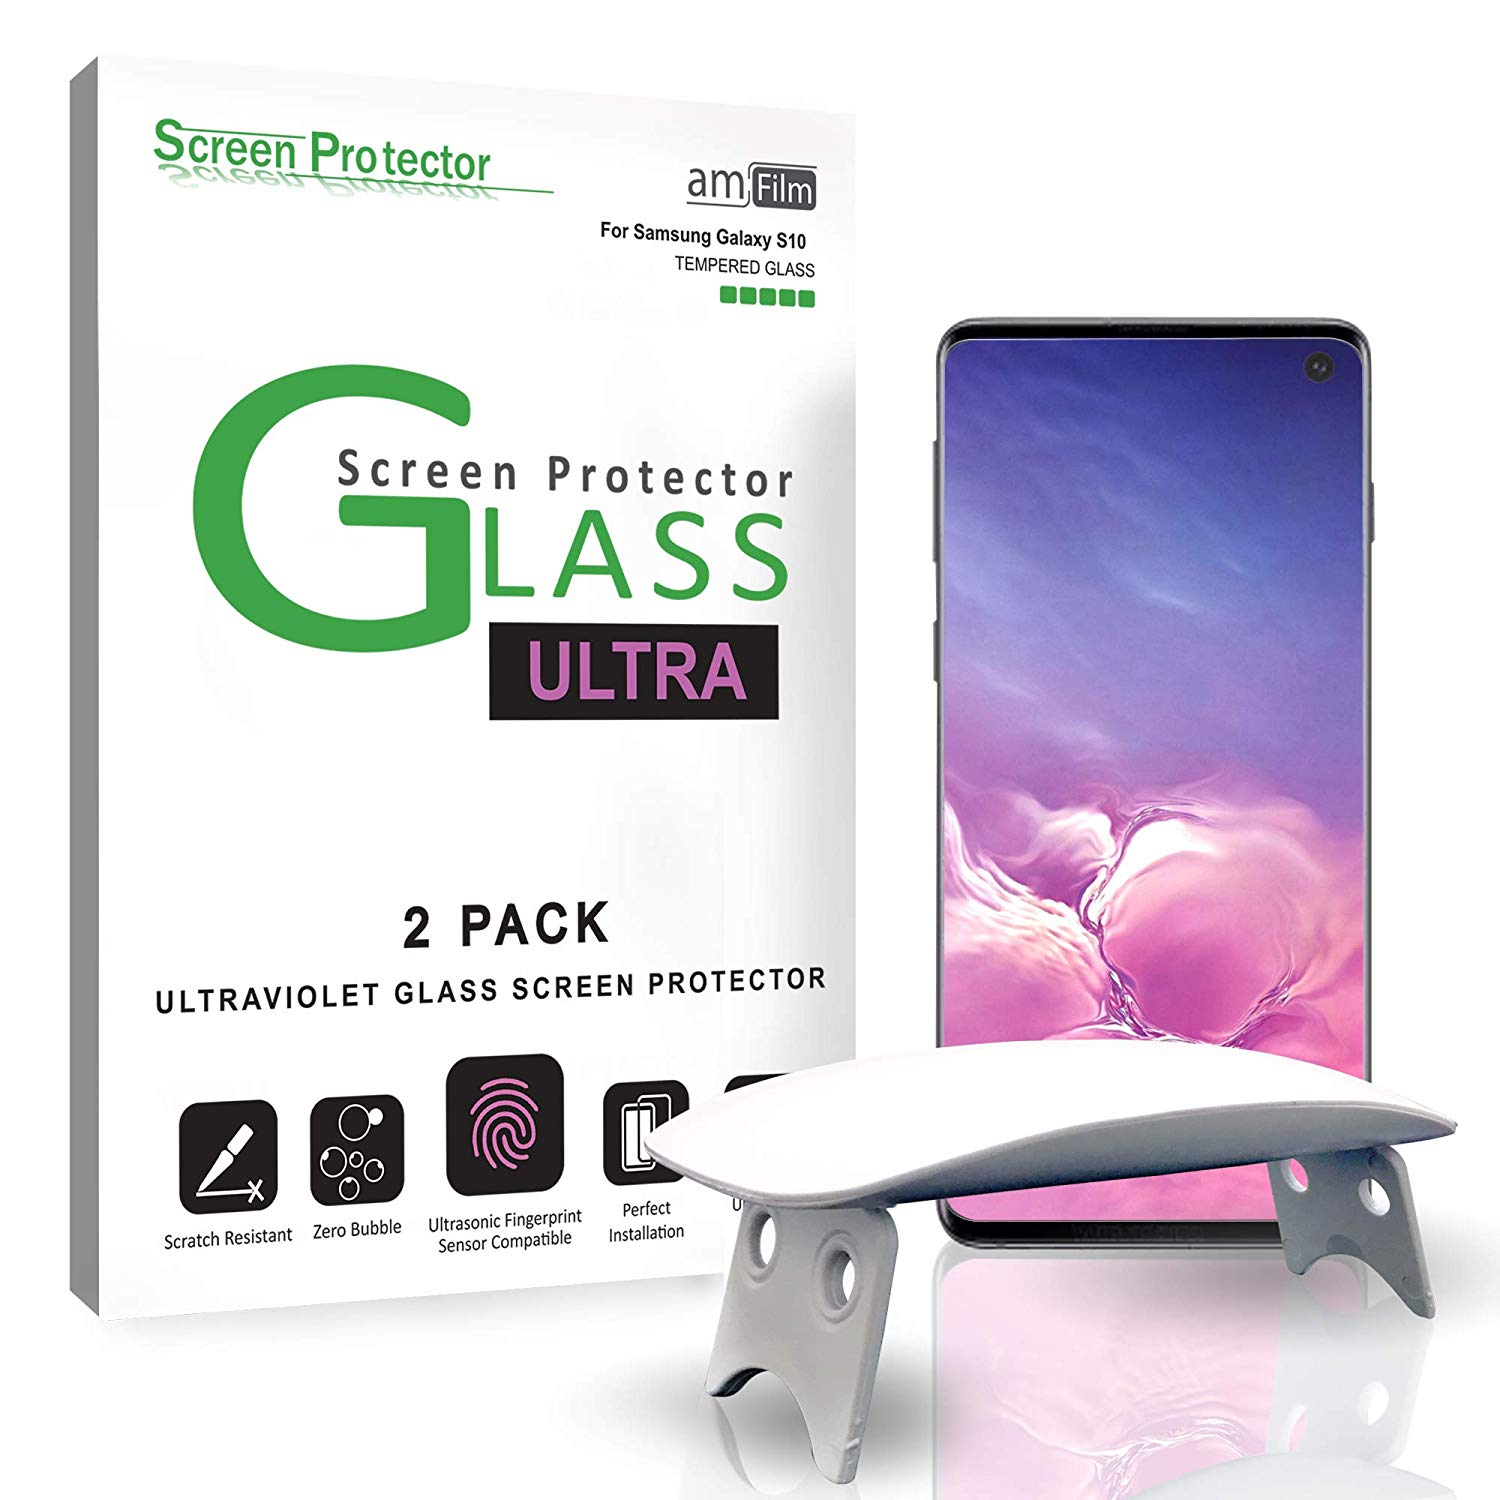 Screen Protector for Samsung Galaxy S10 2-Pack Case friendly Galaxy S10 Screen Protector, Camera Screen Protector Premium 3D Tempered Glass Fingerprint Screen Unlocking Ultra Clear